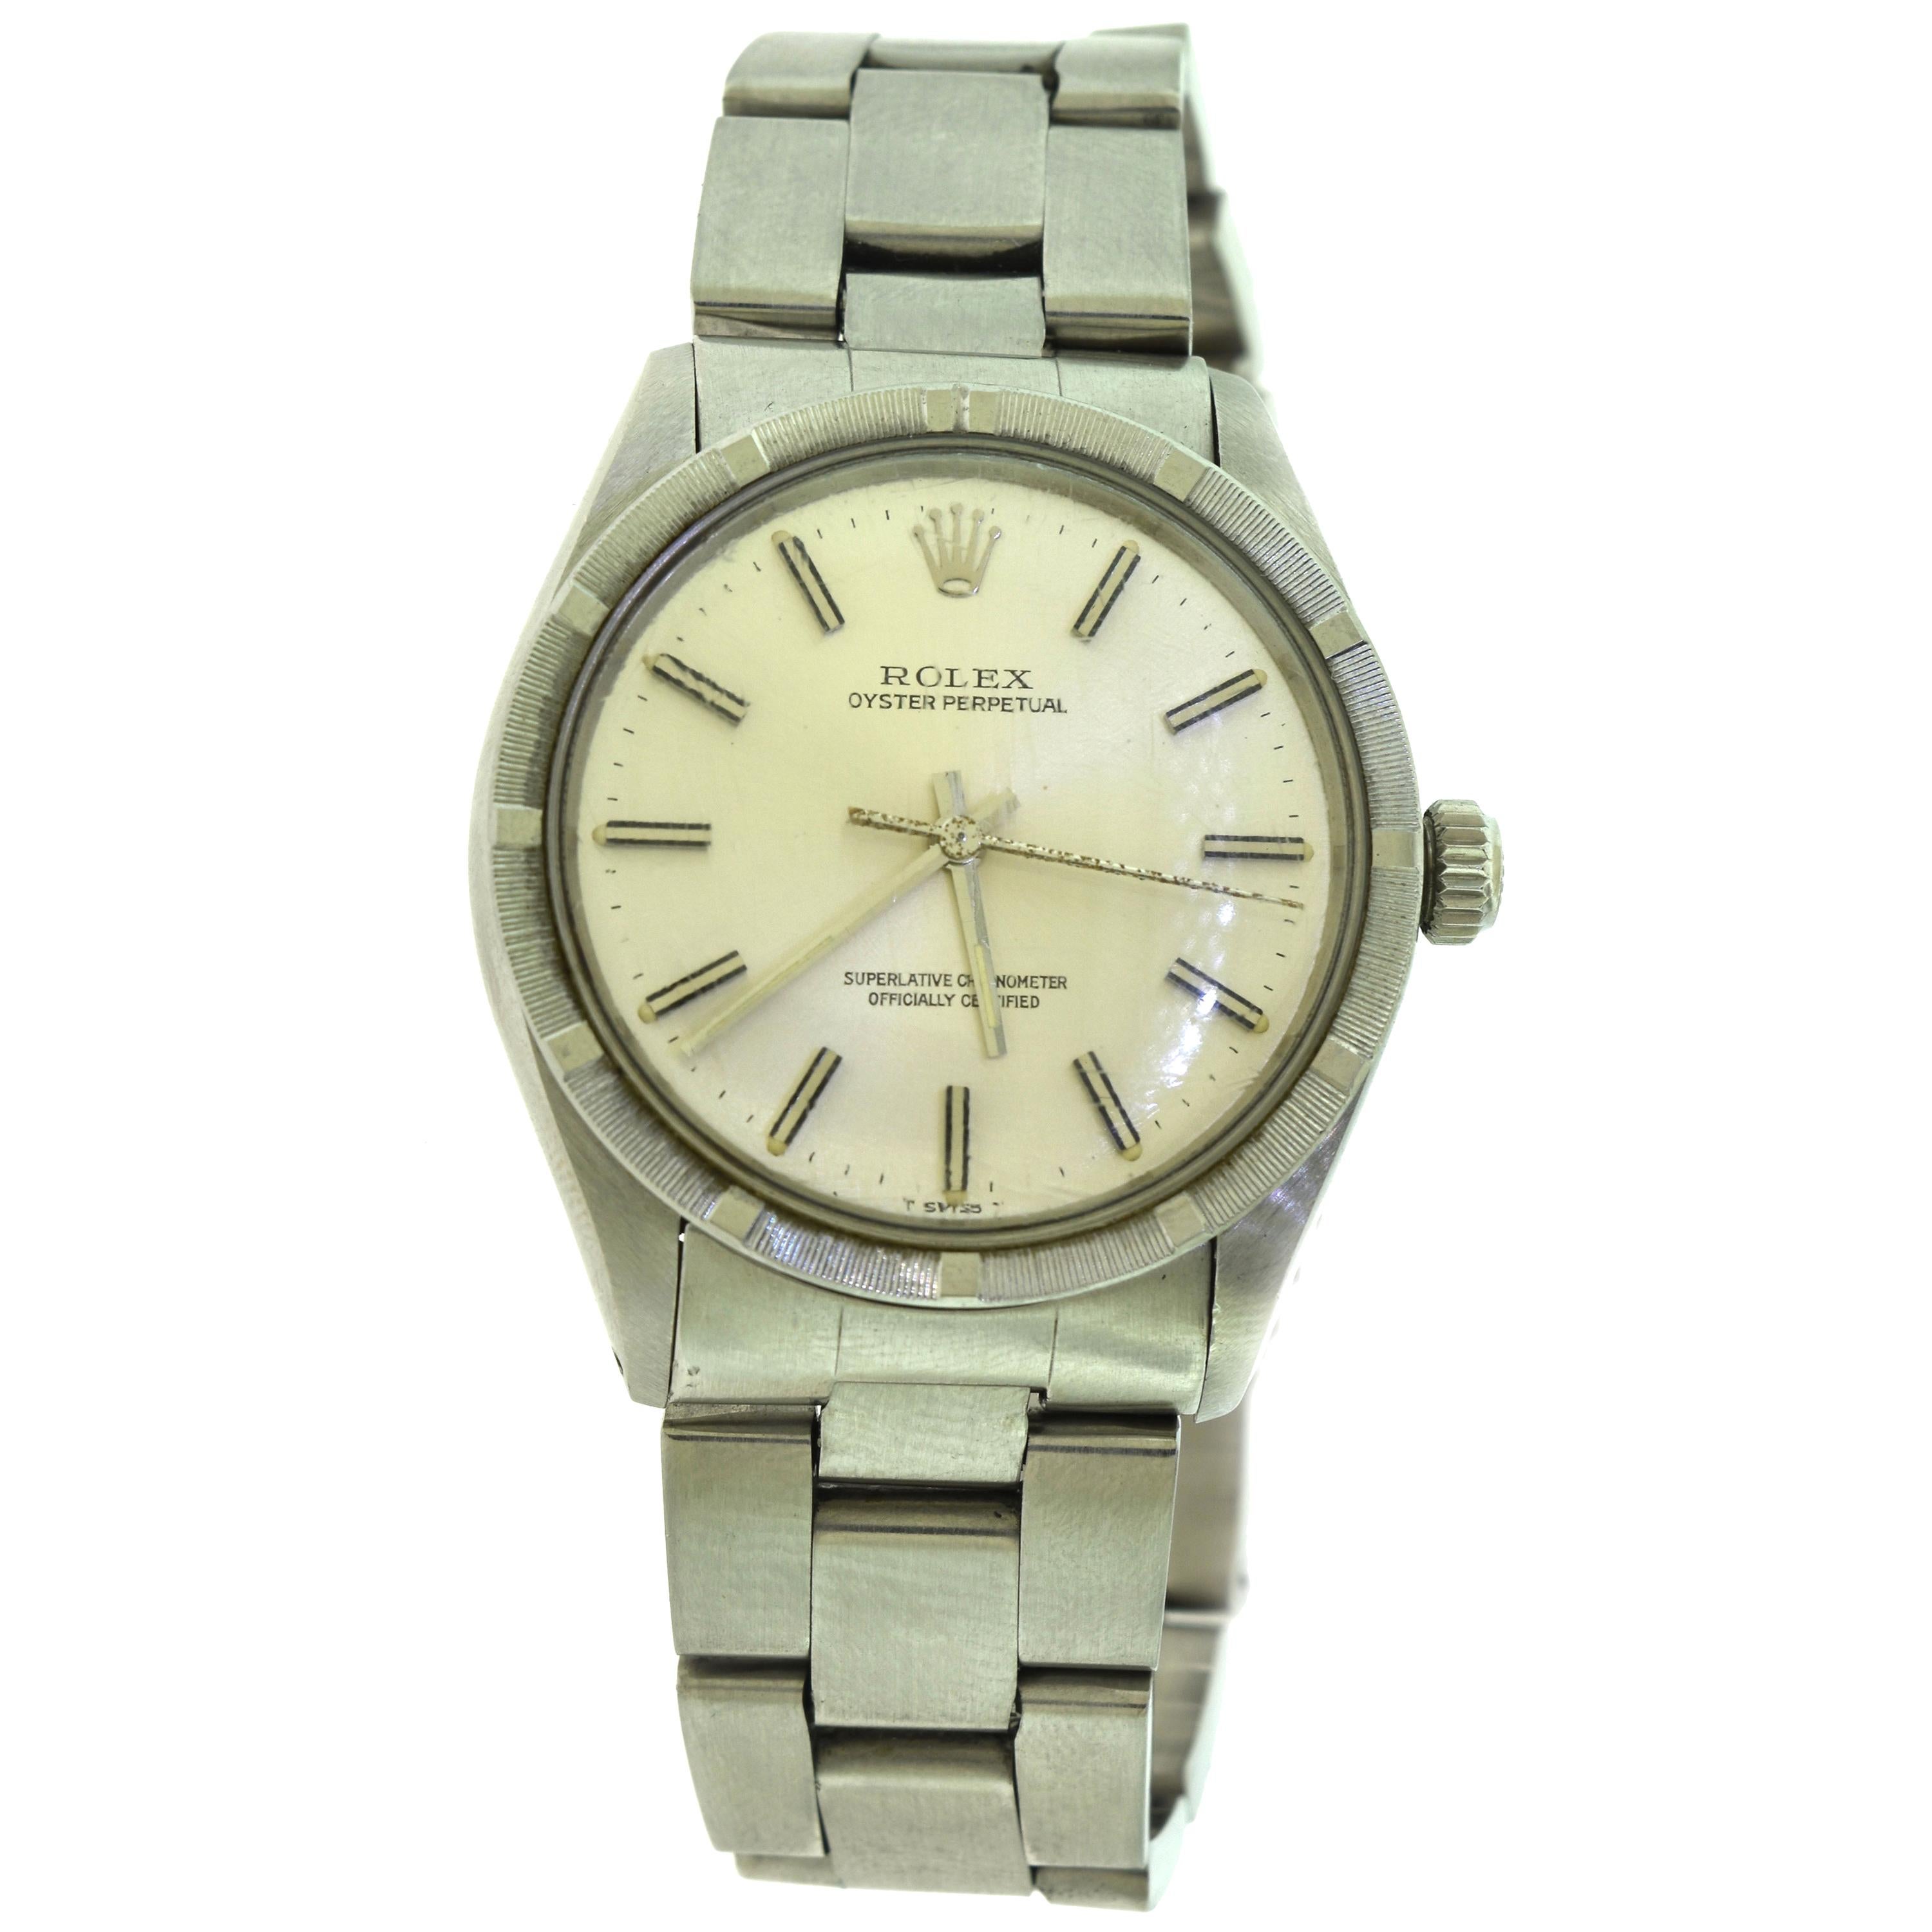 Rolex Oyster Perpetual Ref. 1007 Stainless Steel Champagne Dial Watch 'R-8'